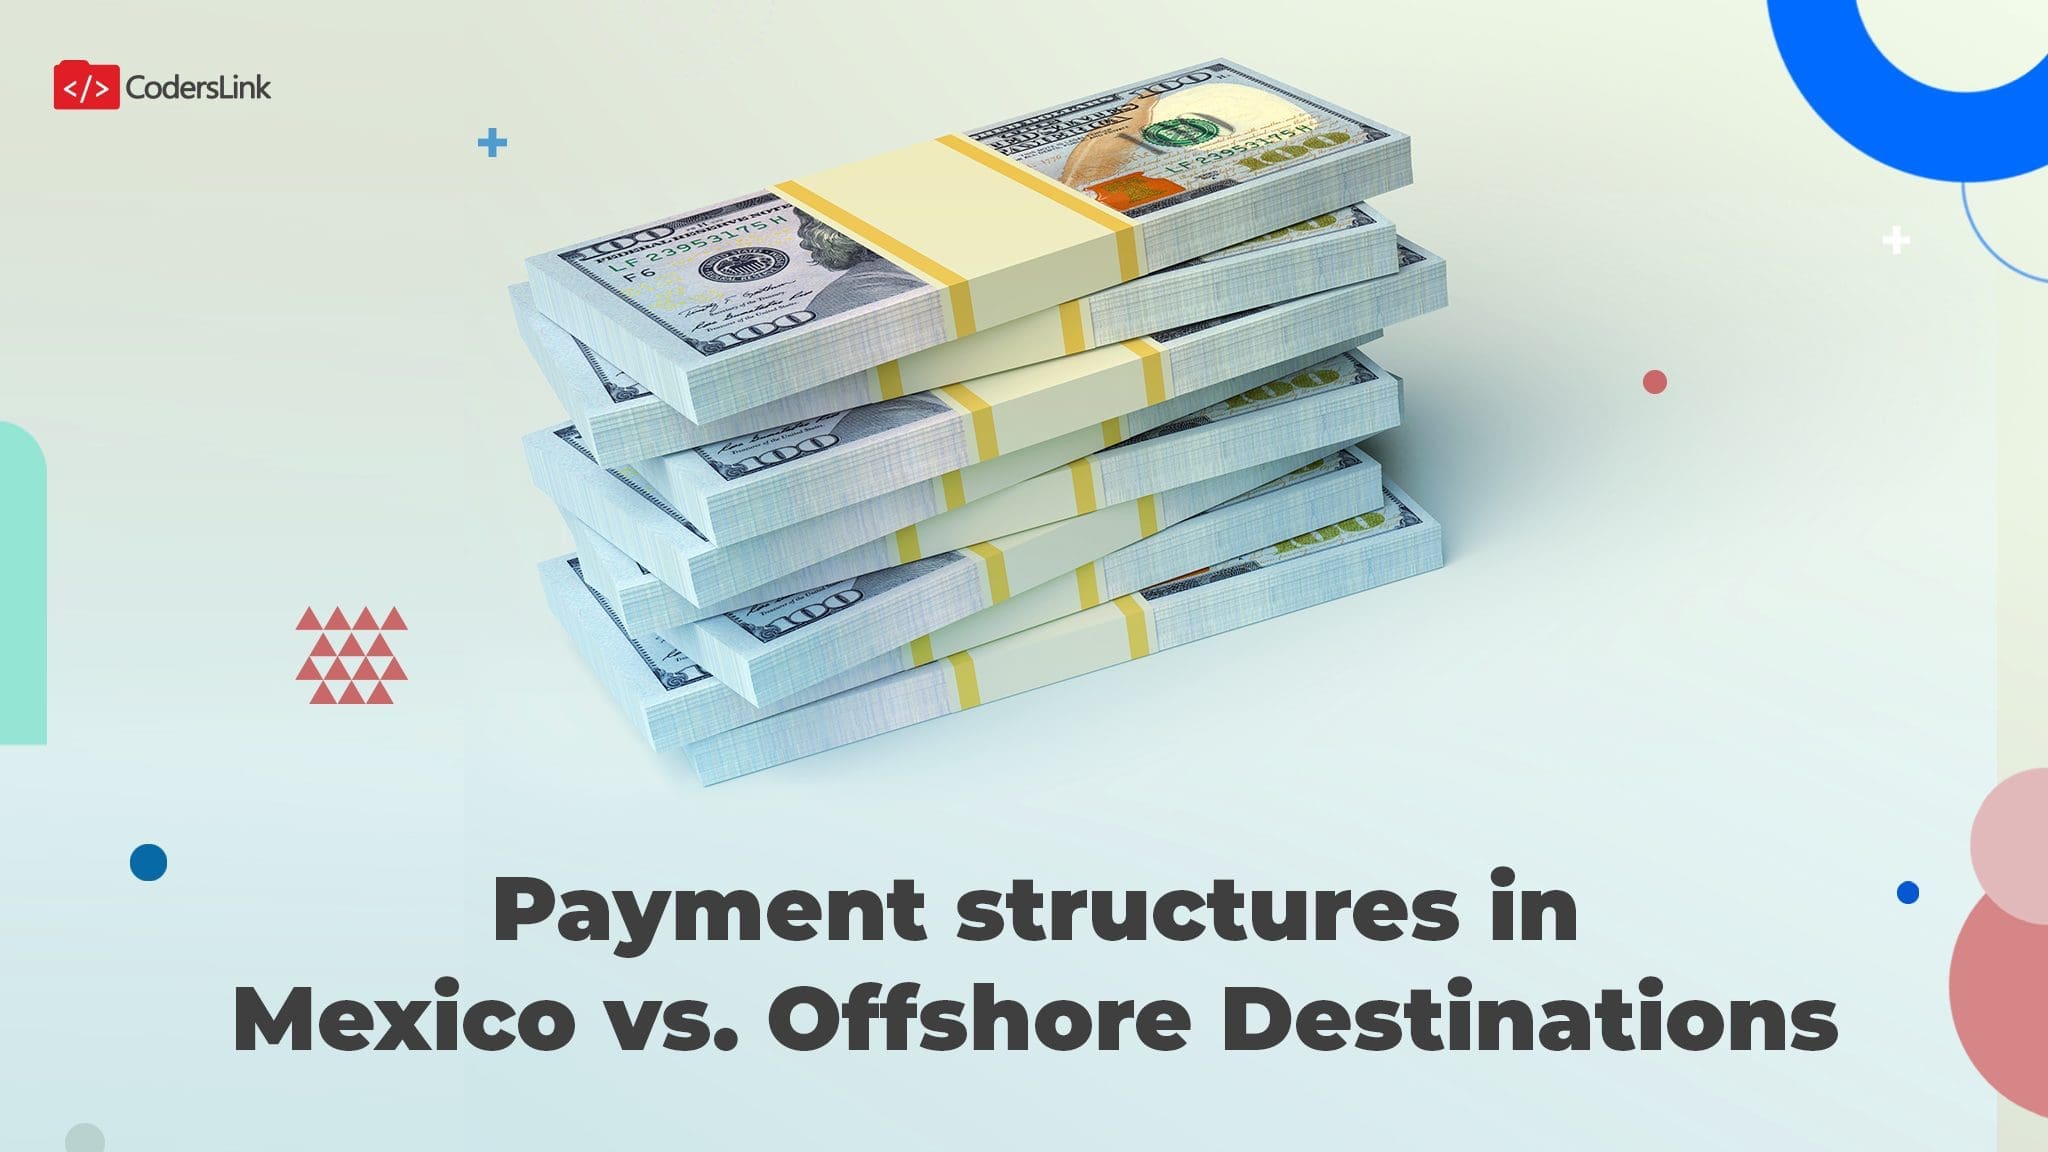 Mexico pay structures